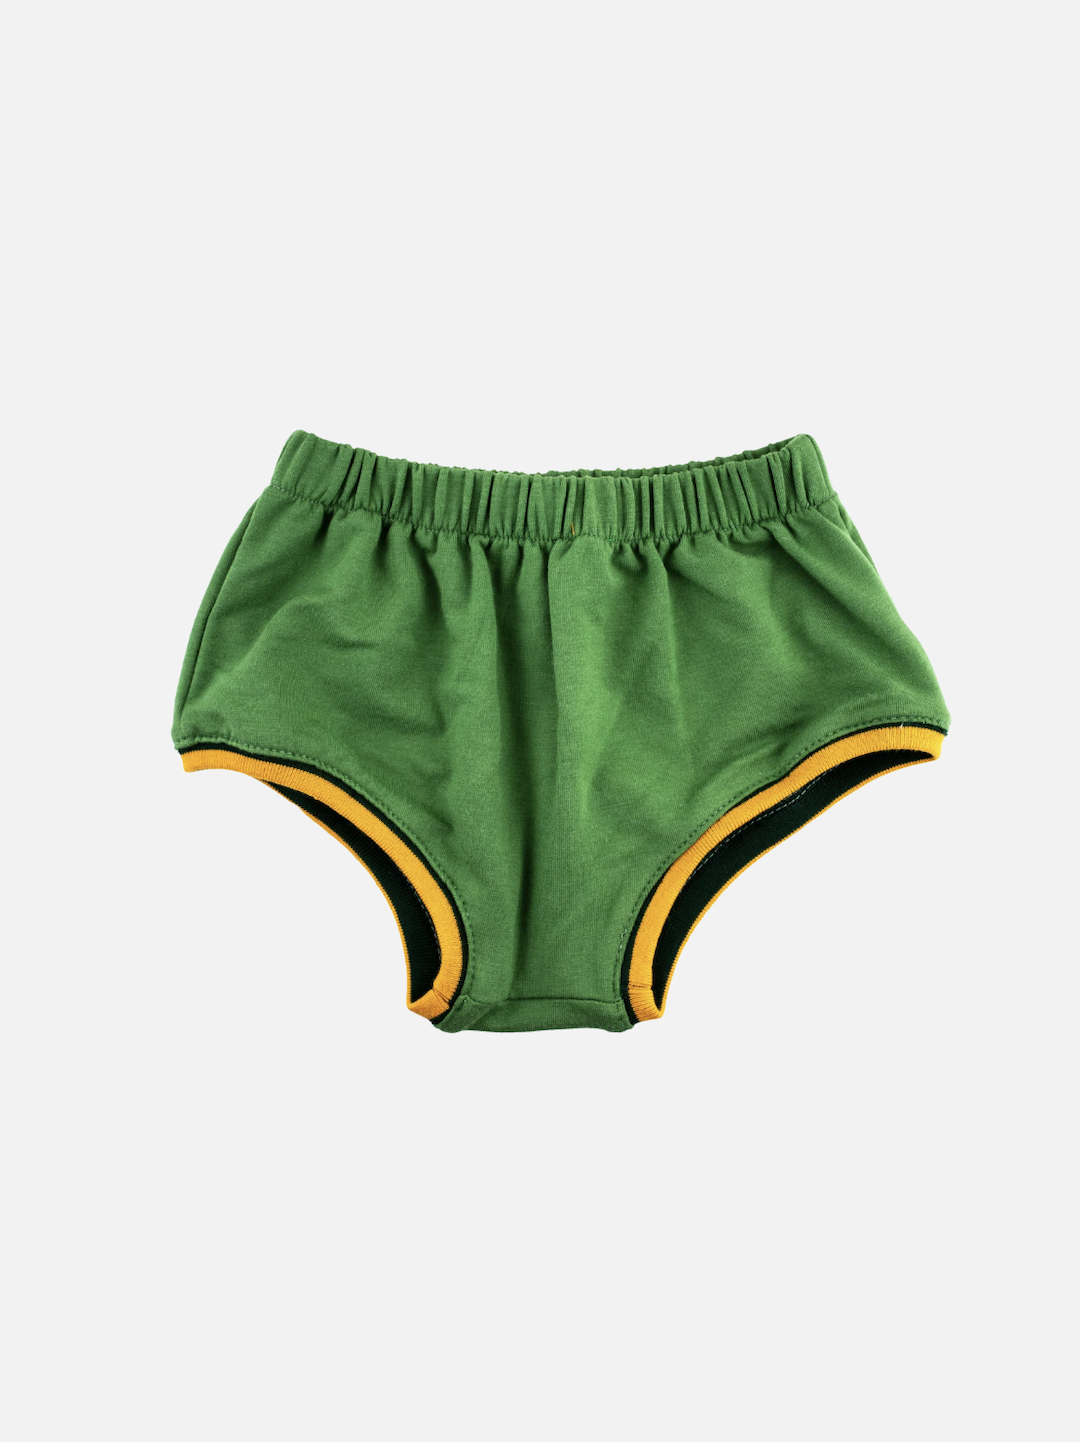 Mint | Mint green kids' bloomers with yellow trim at the leg holes